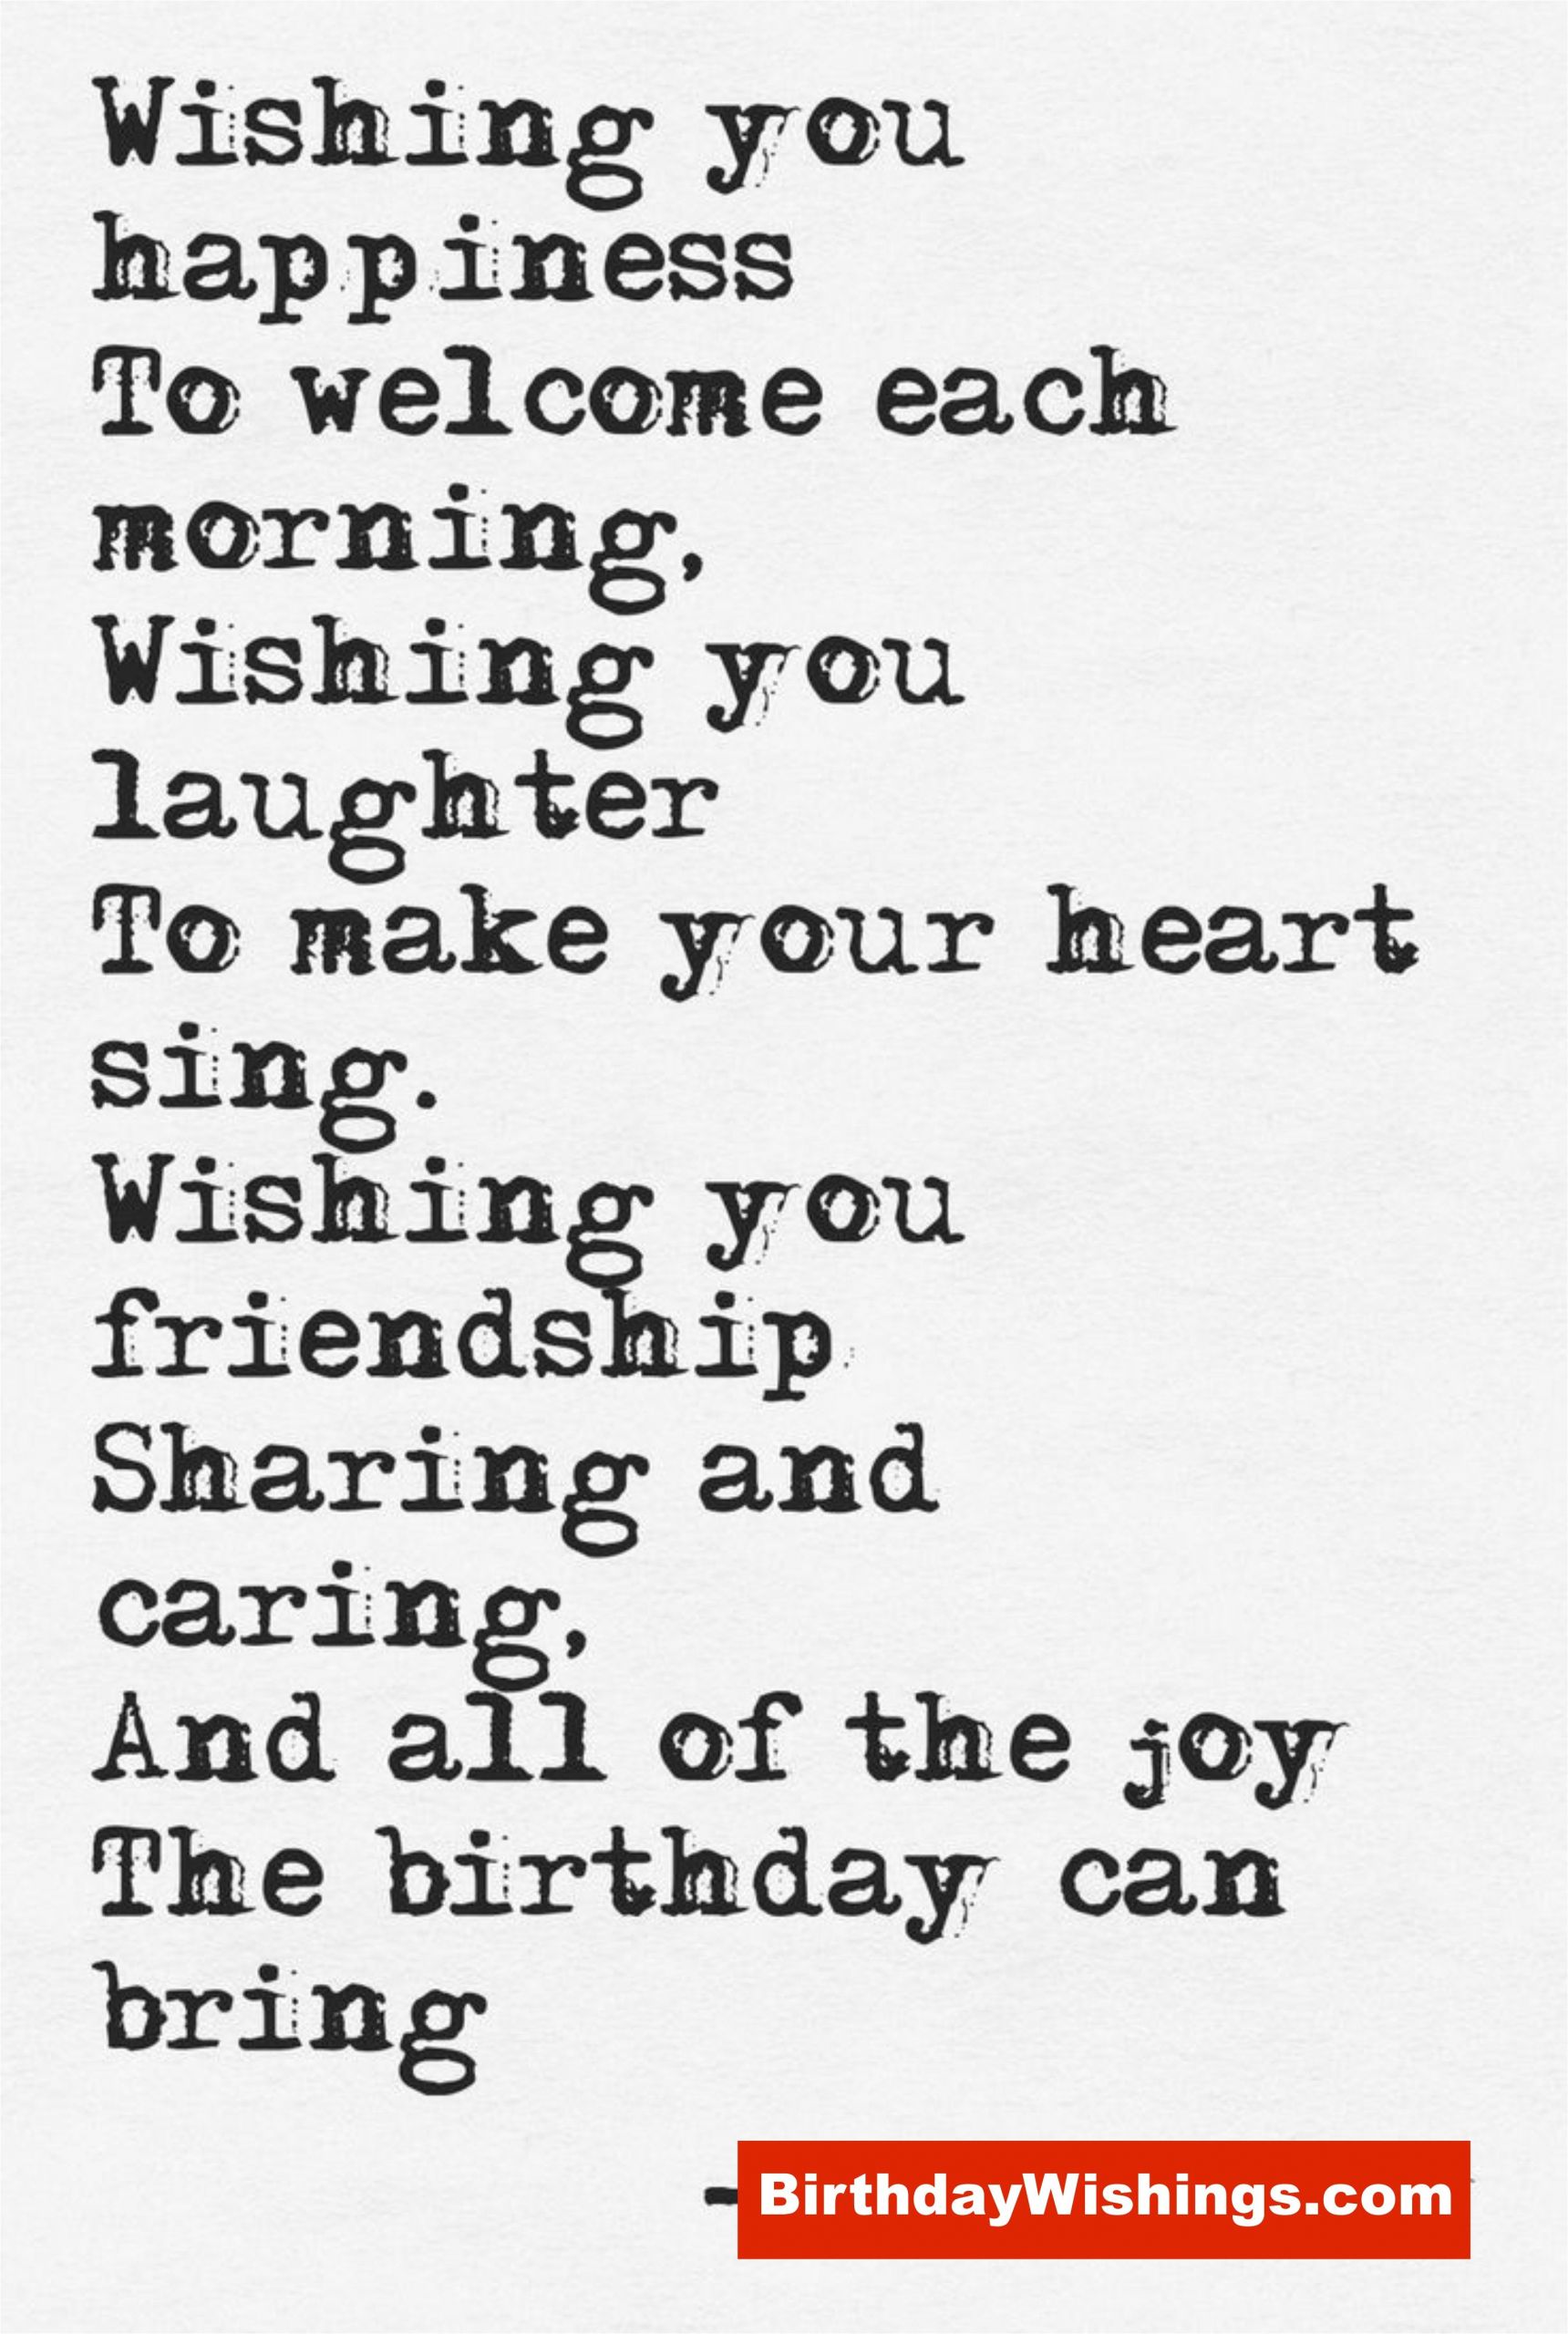 Birthday Card Quotes for Best Friend Birthday Wishes for Best Friend with Images Happy